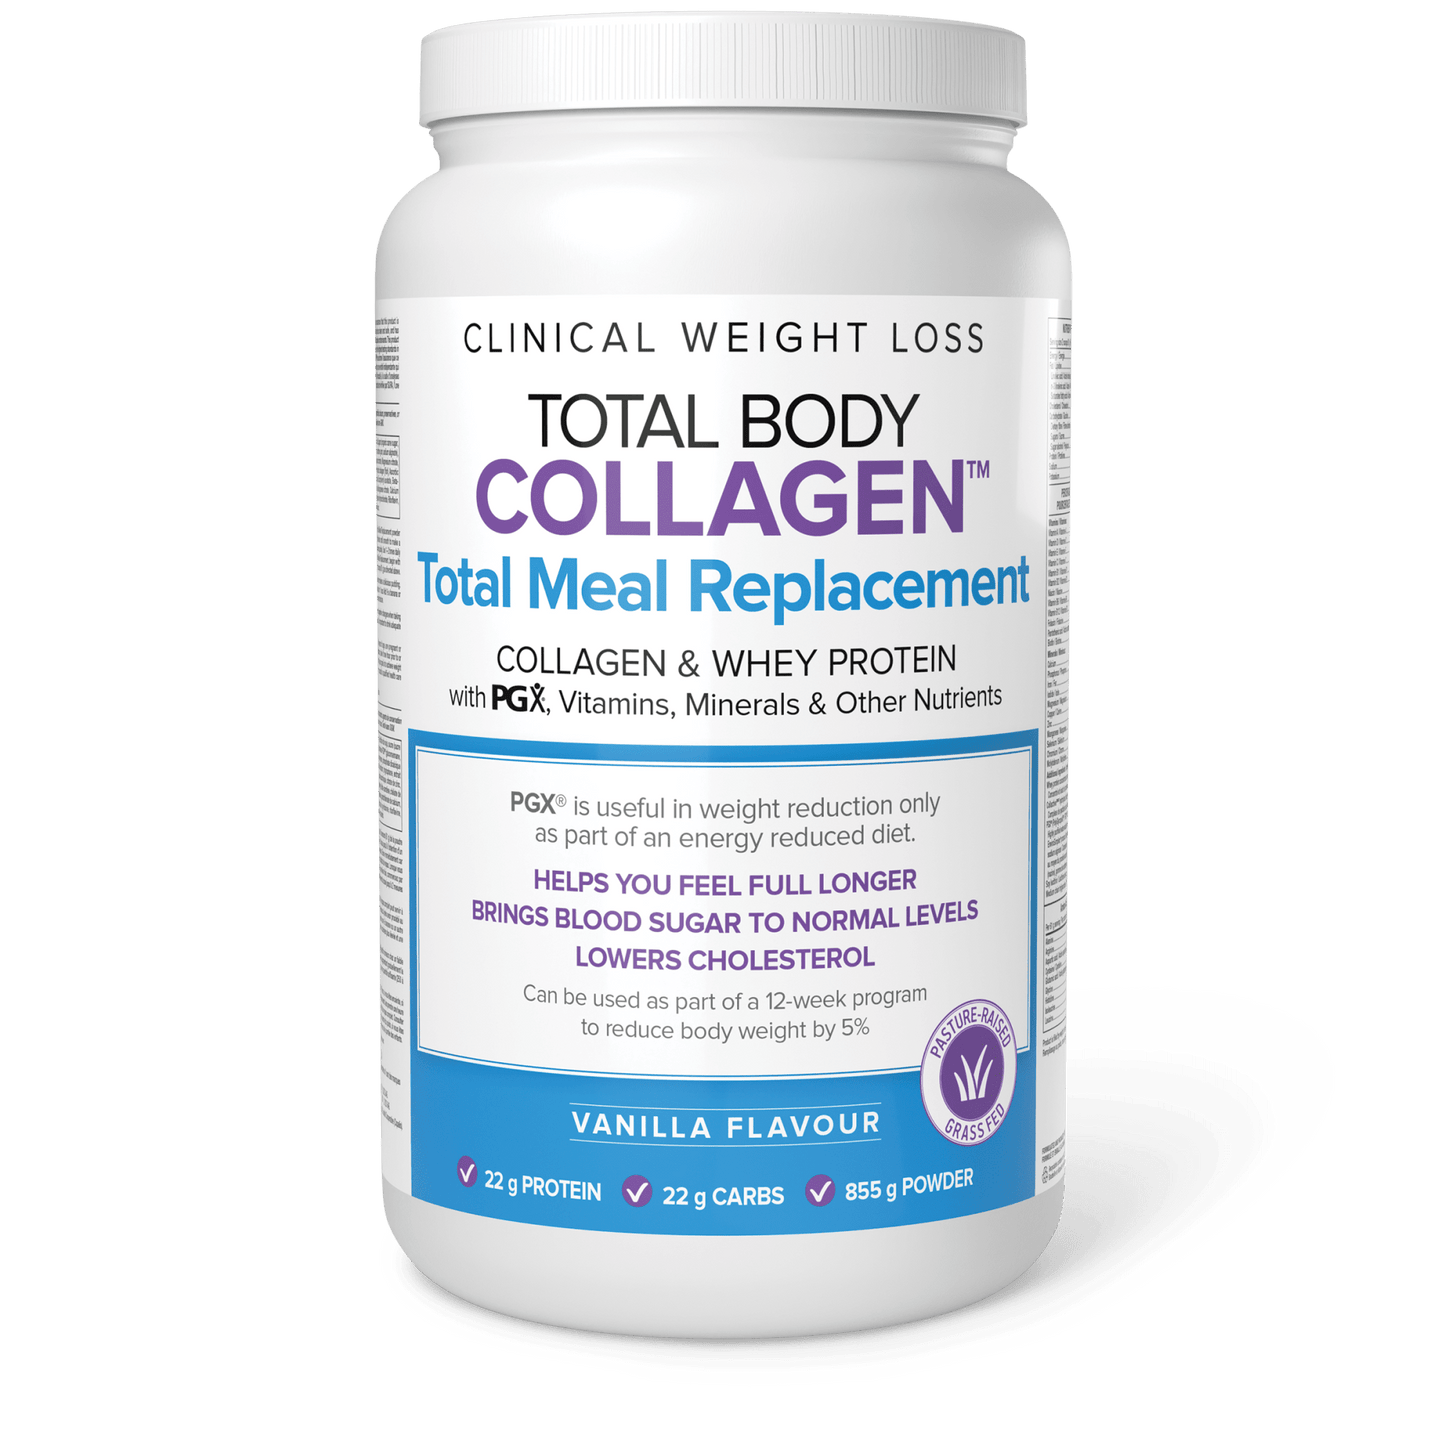 Total Body Collagen Total Meal Replacement, Total Body Collagen|v|image|2644